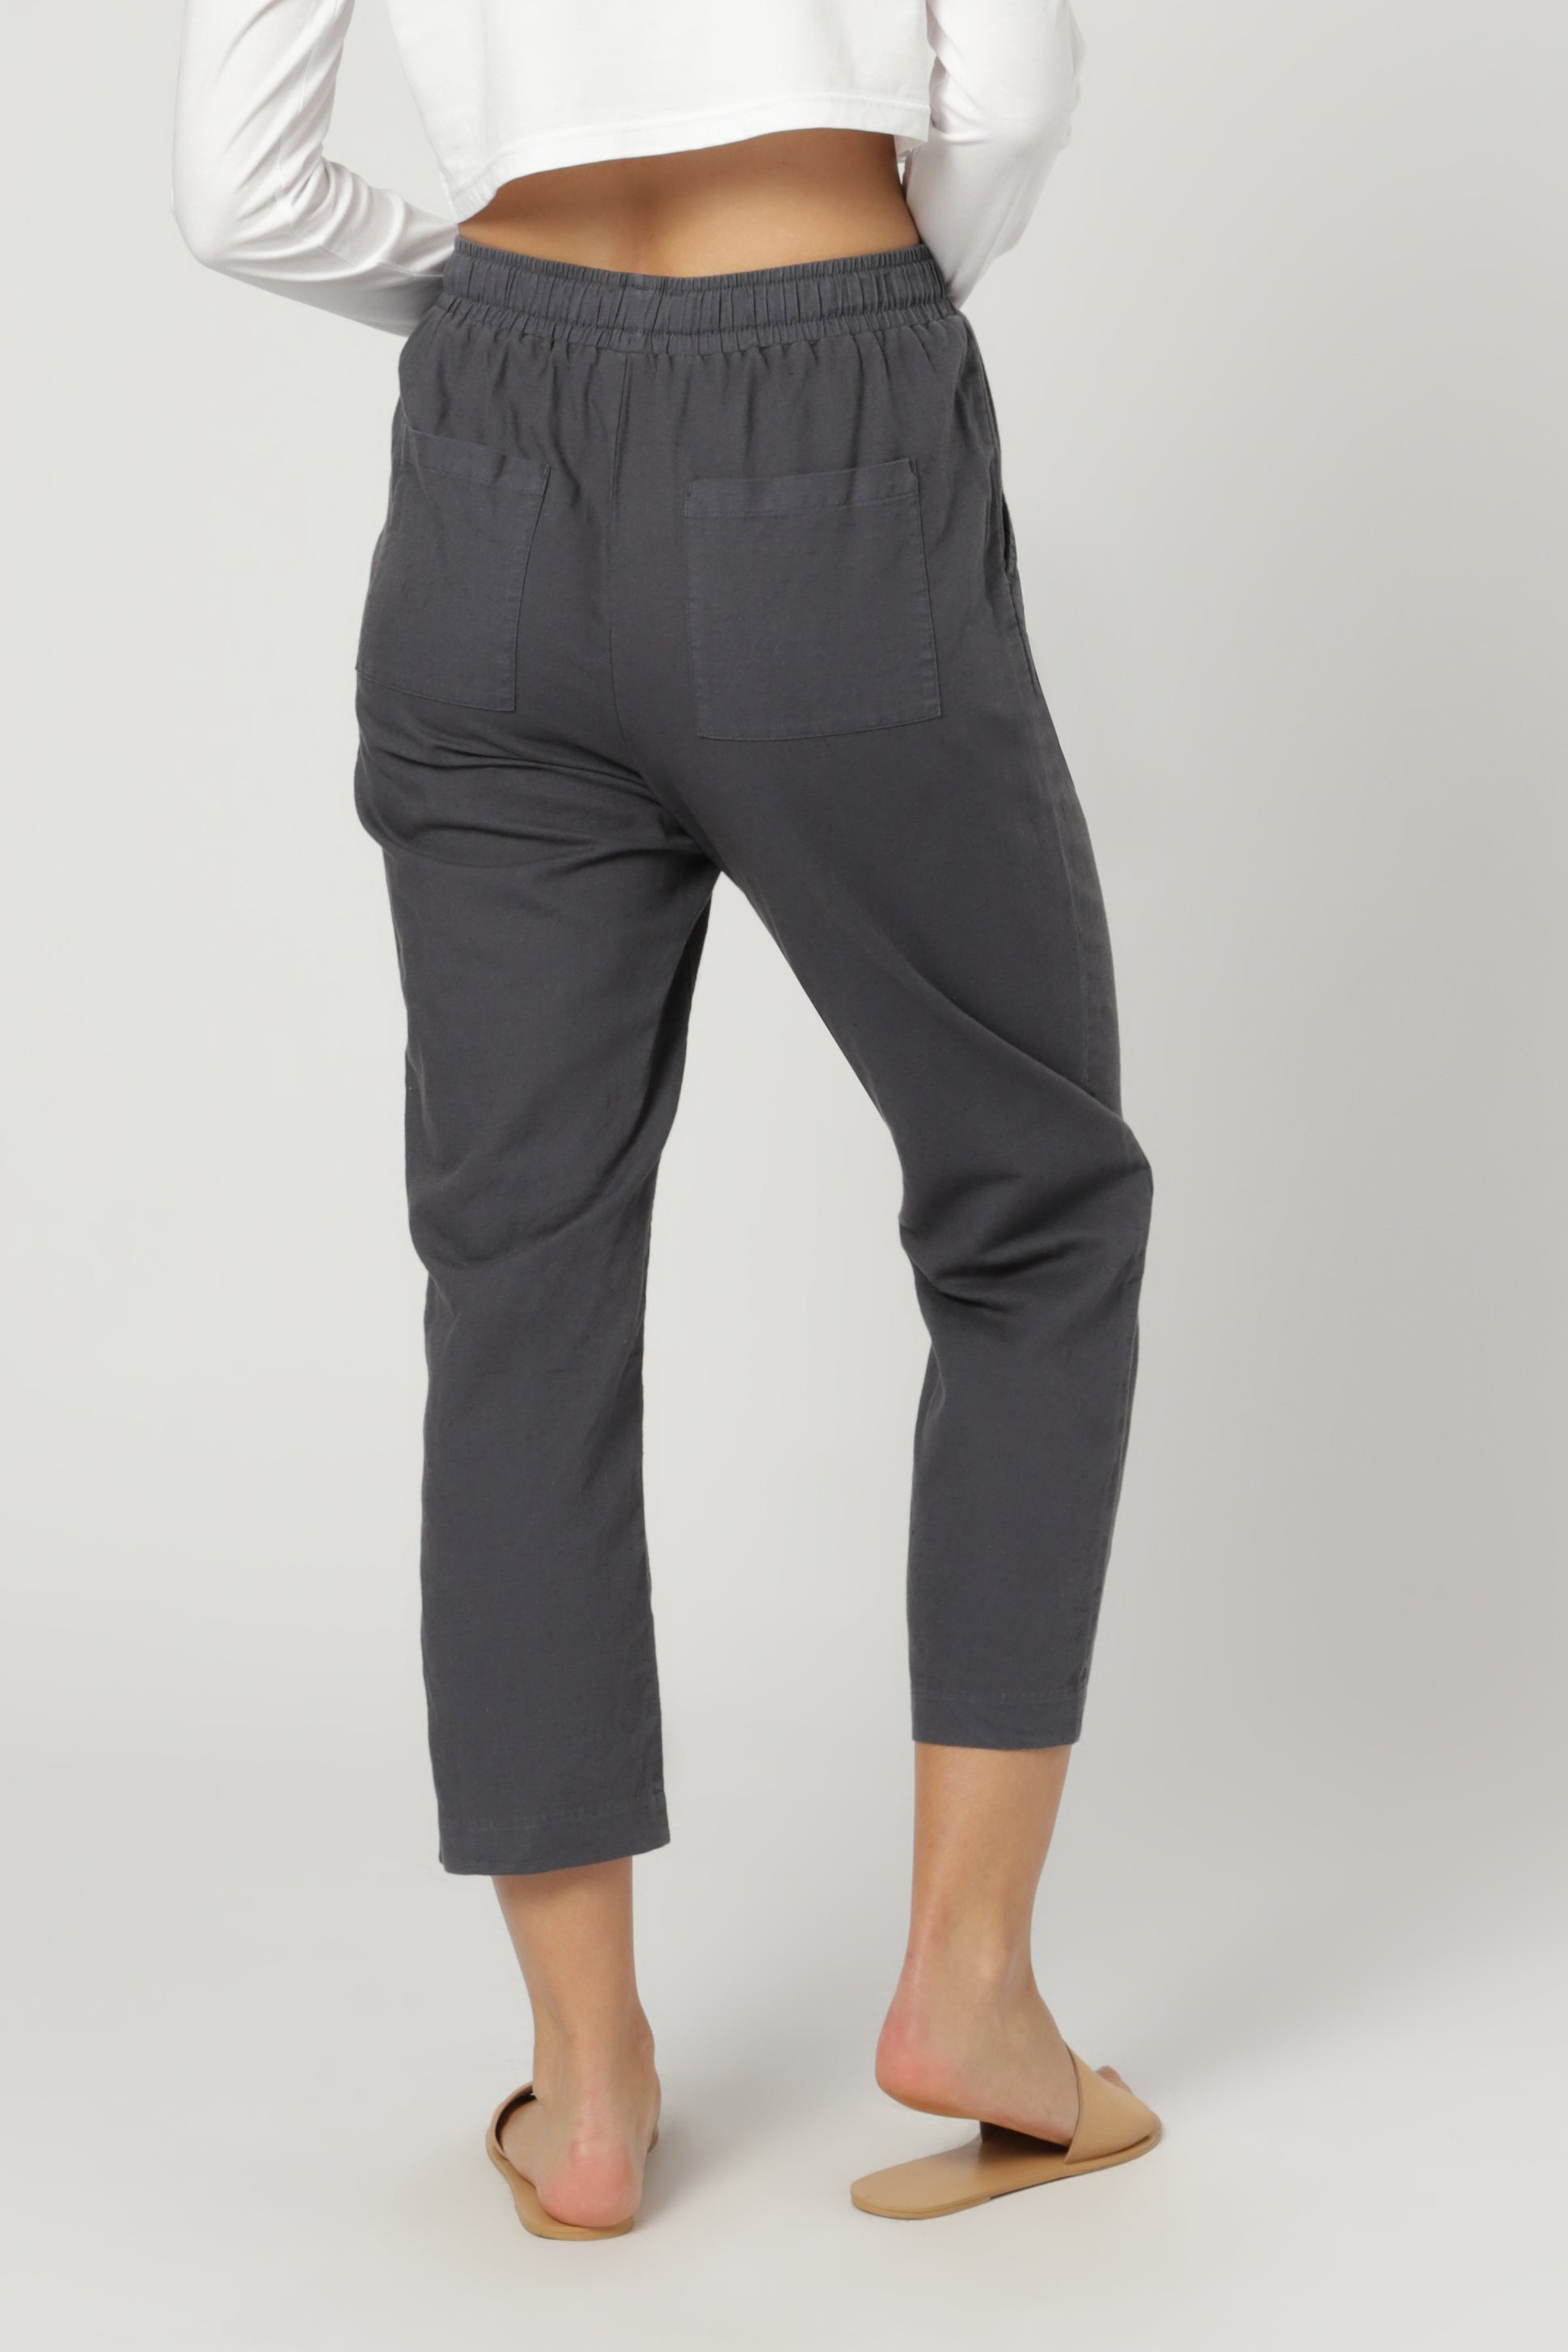 Nude Lucy Nude Classic Pant Washed Navy Pants 